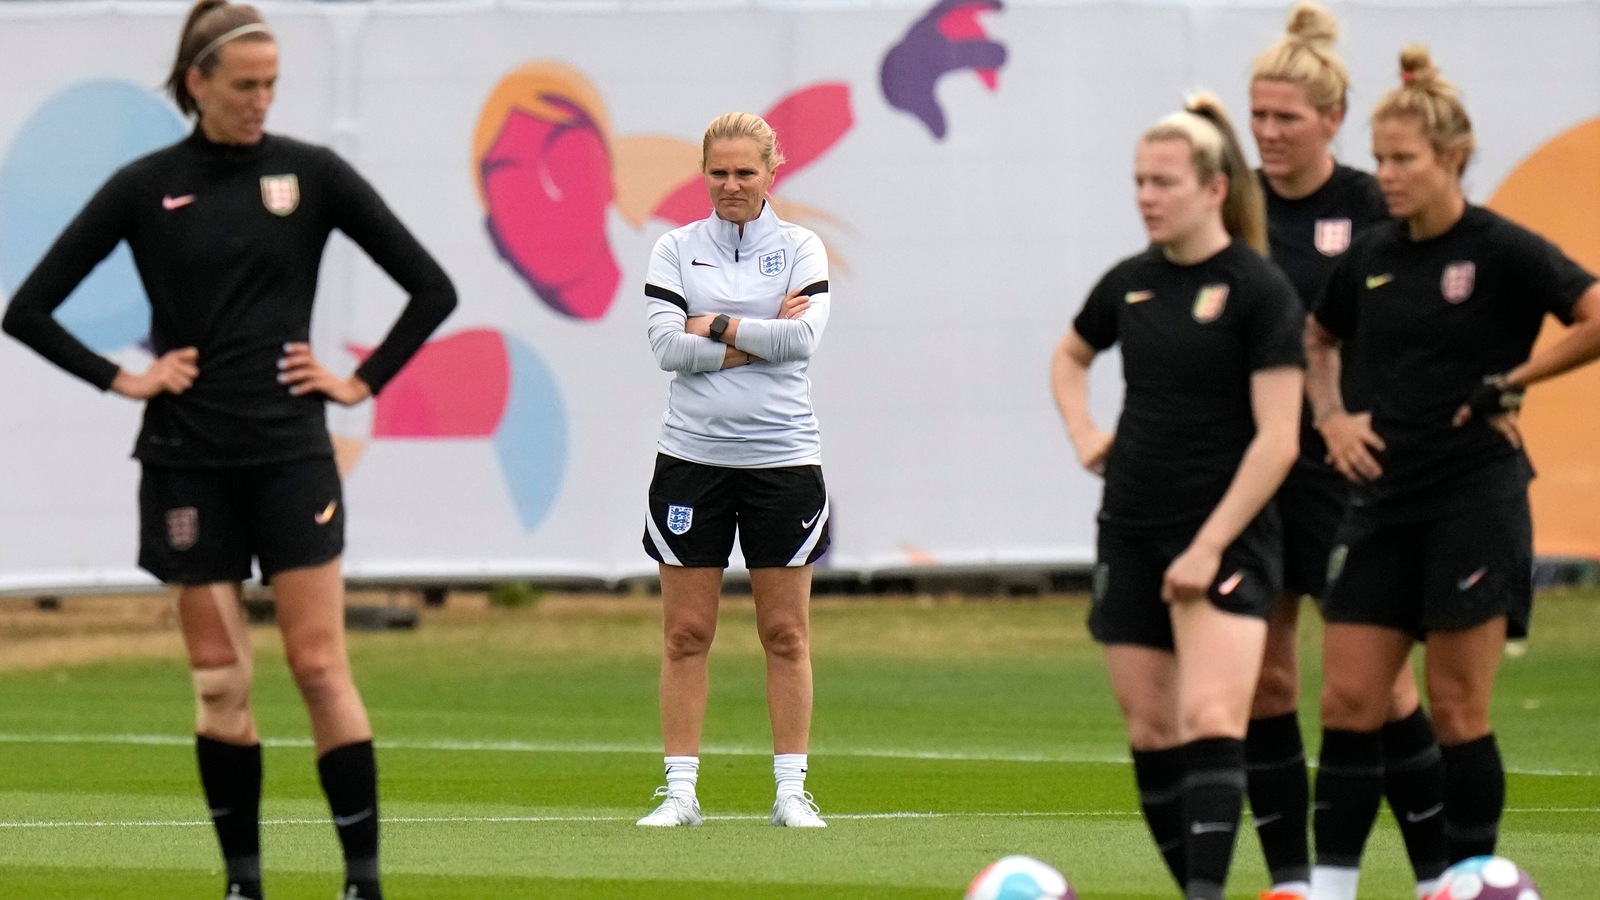 England hope to inspire nation in Sweden Euro semi-final